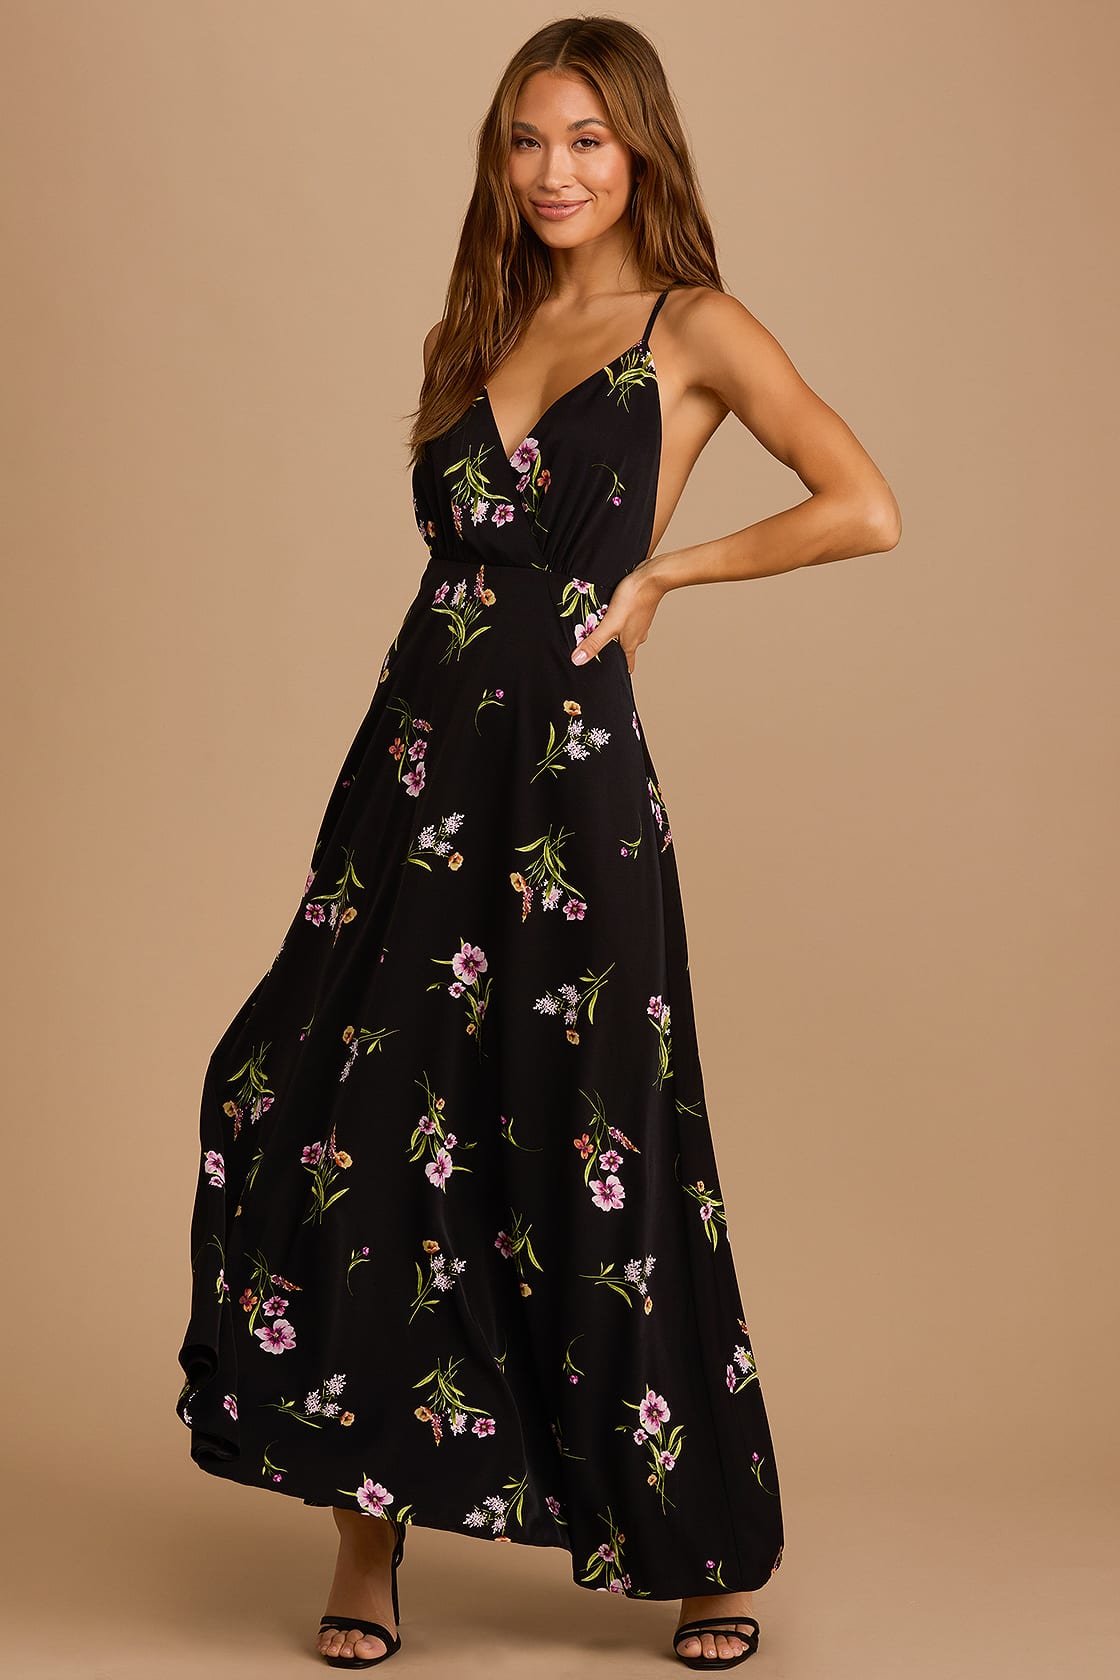 Flow of Love Black Floral Print Strappy Maxi Dress